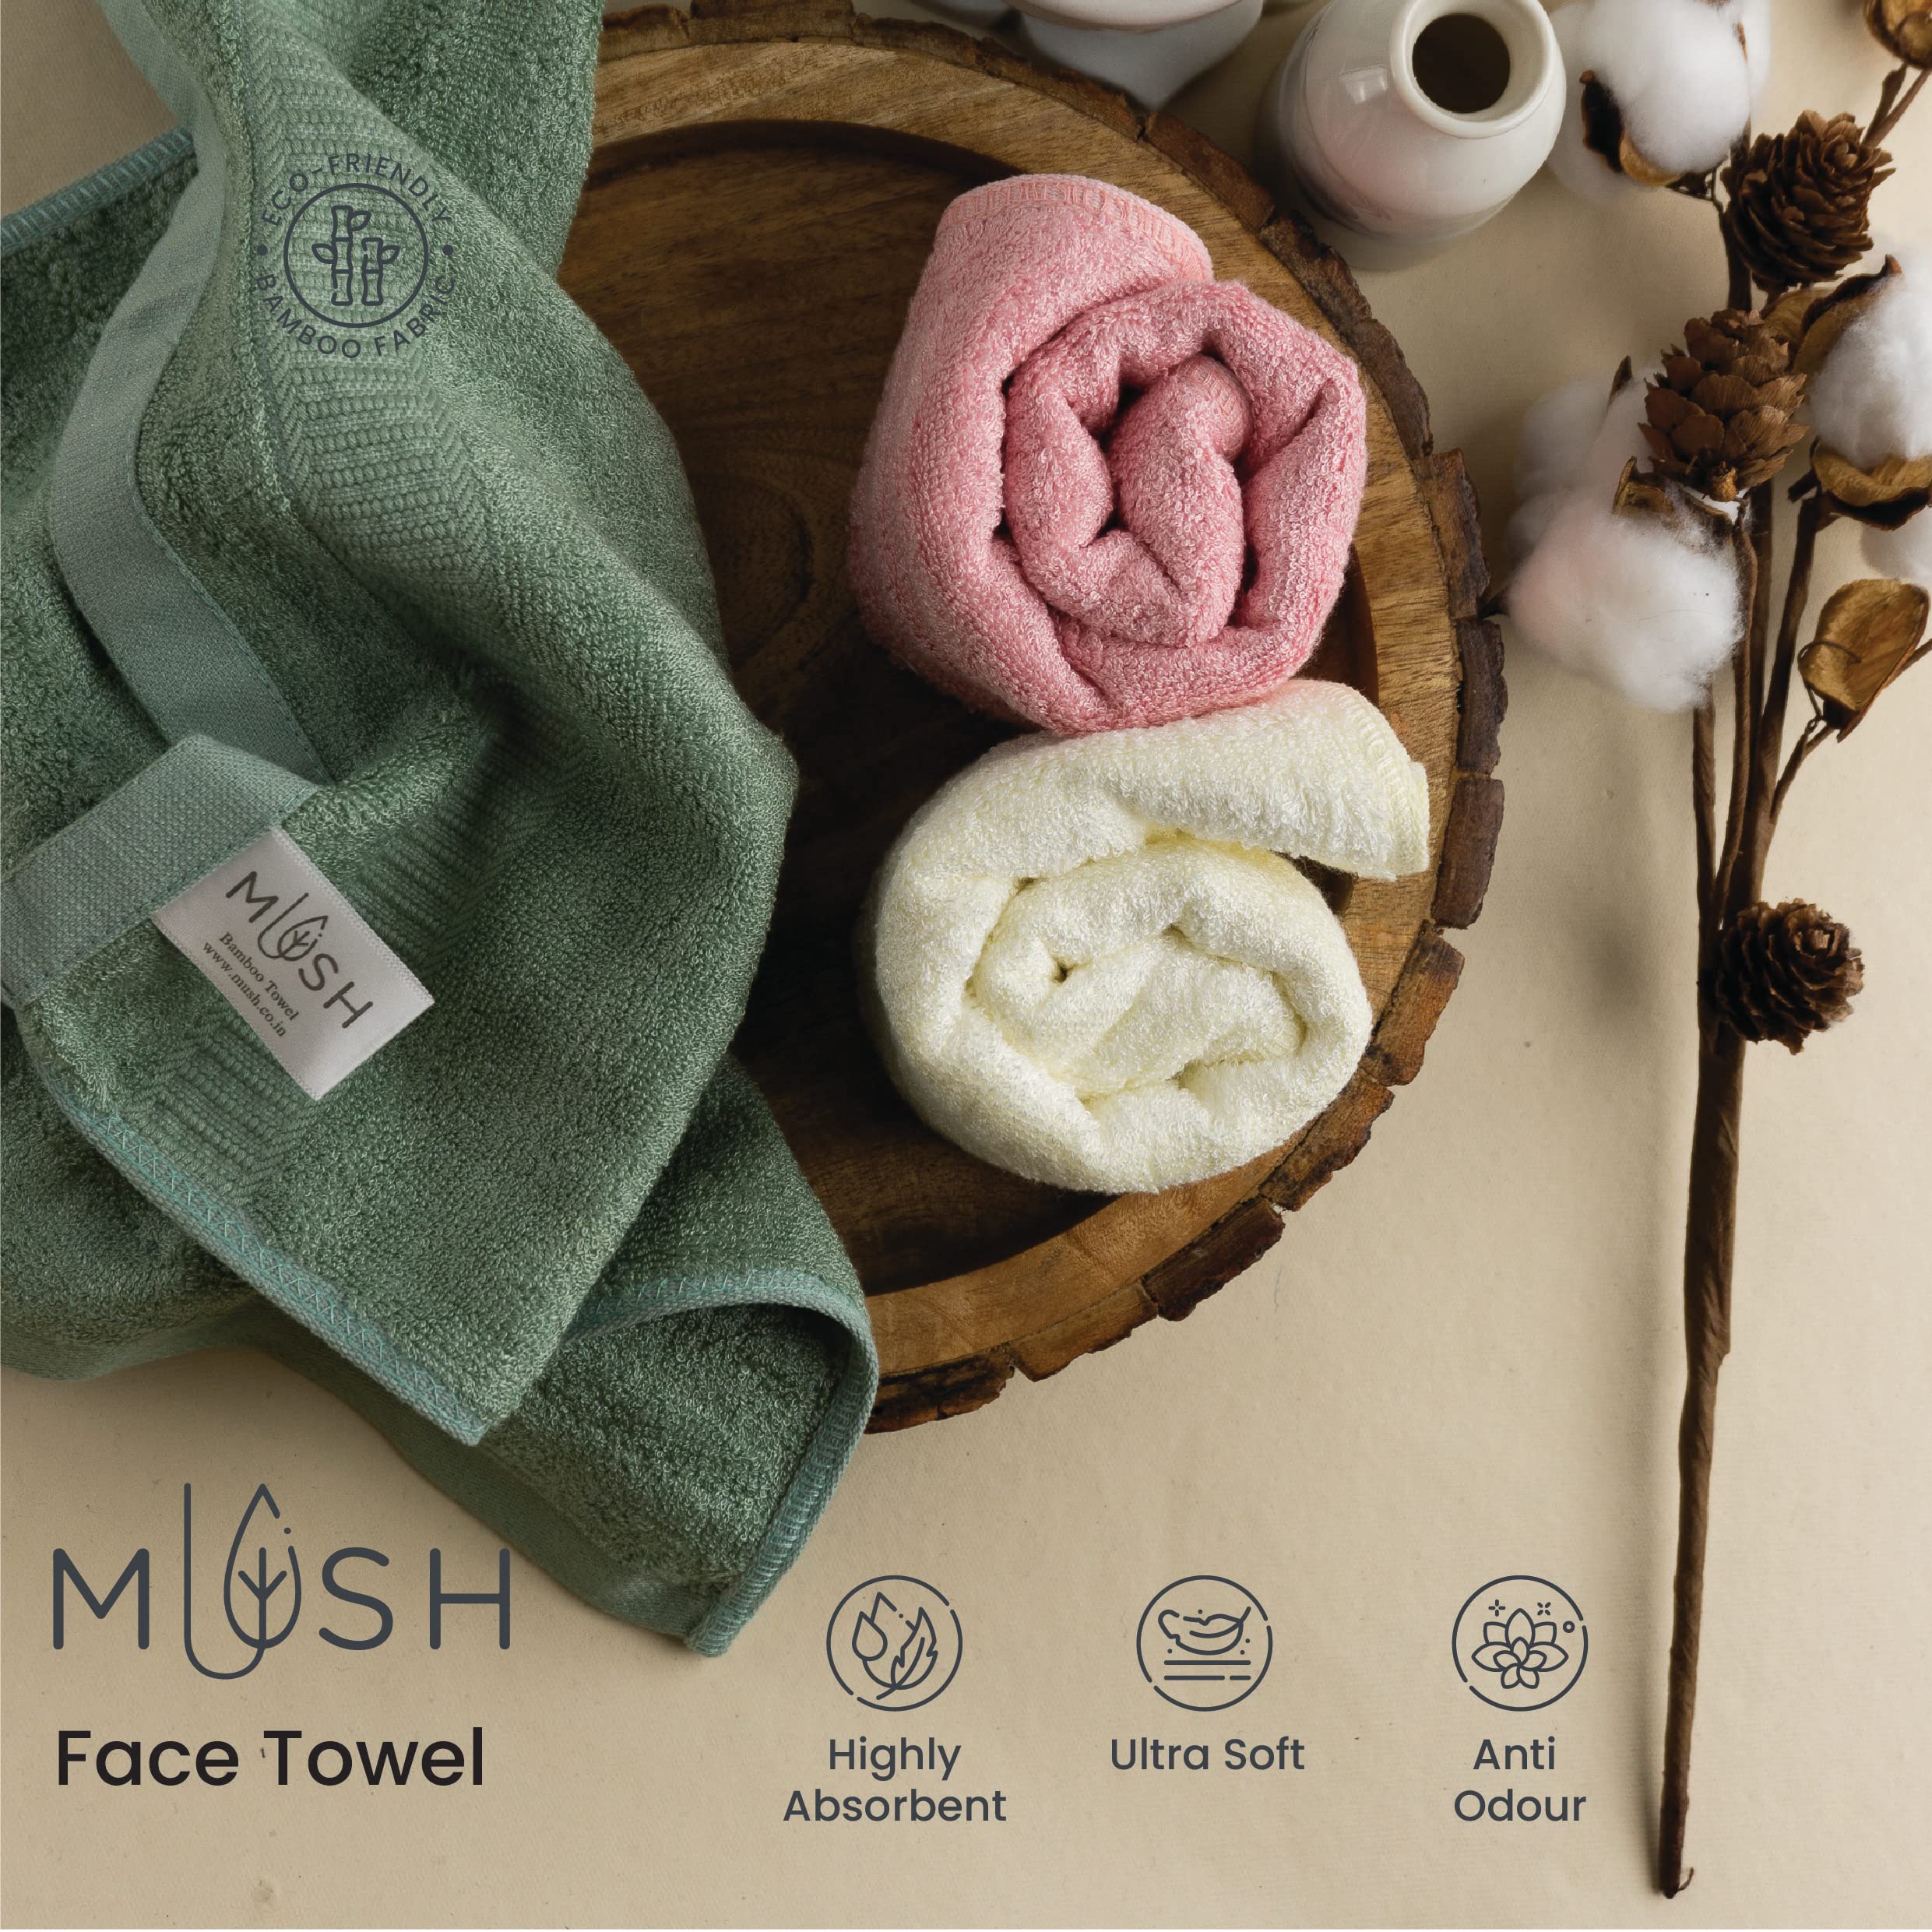 Mush 100% Bamboo Face Towel | Ultra Soft, Absorbent, & Quick Dry Towels for Facewash, Gym, Travel | Suitable for Sensitive/Acne Prone Skin | 13 x 13 Inches | 500 GSM Pack of 3 (Golden Brown)